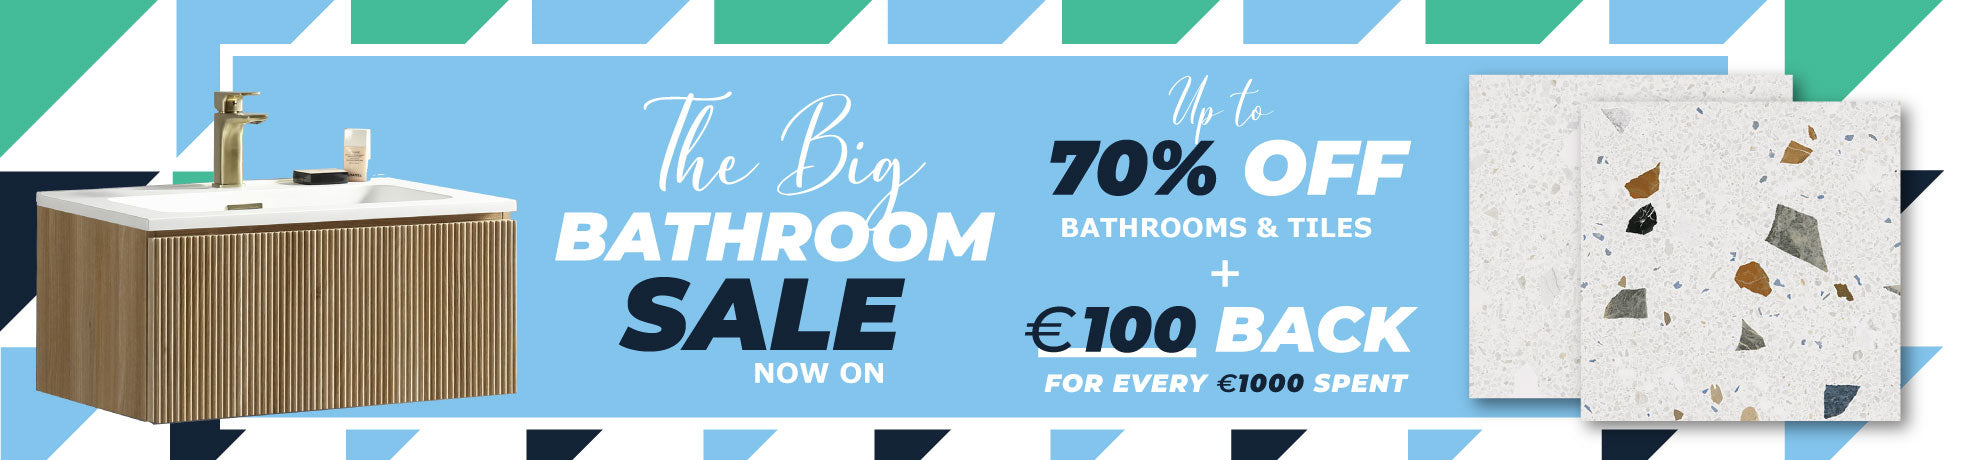 Get up to 70% Off Bathrooms and Tiles